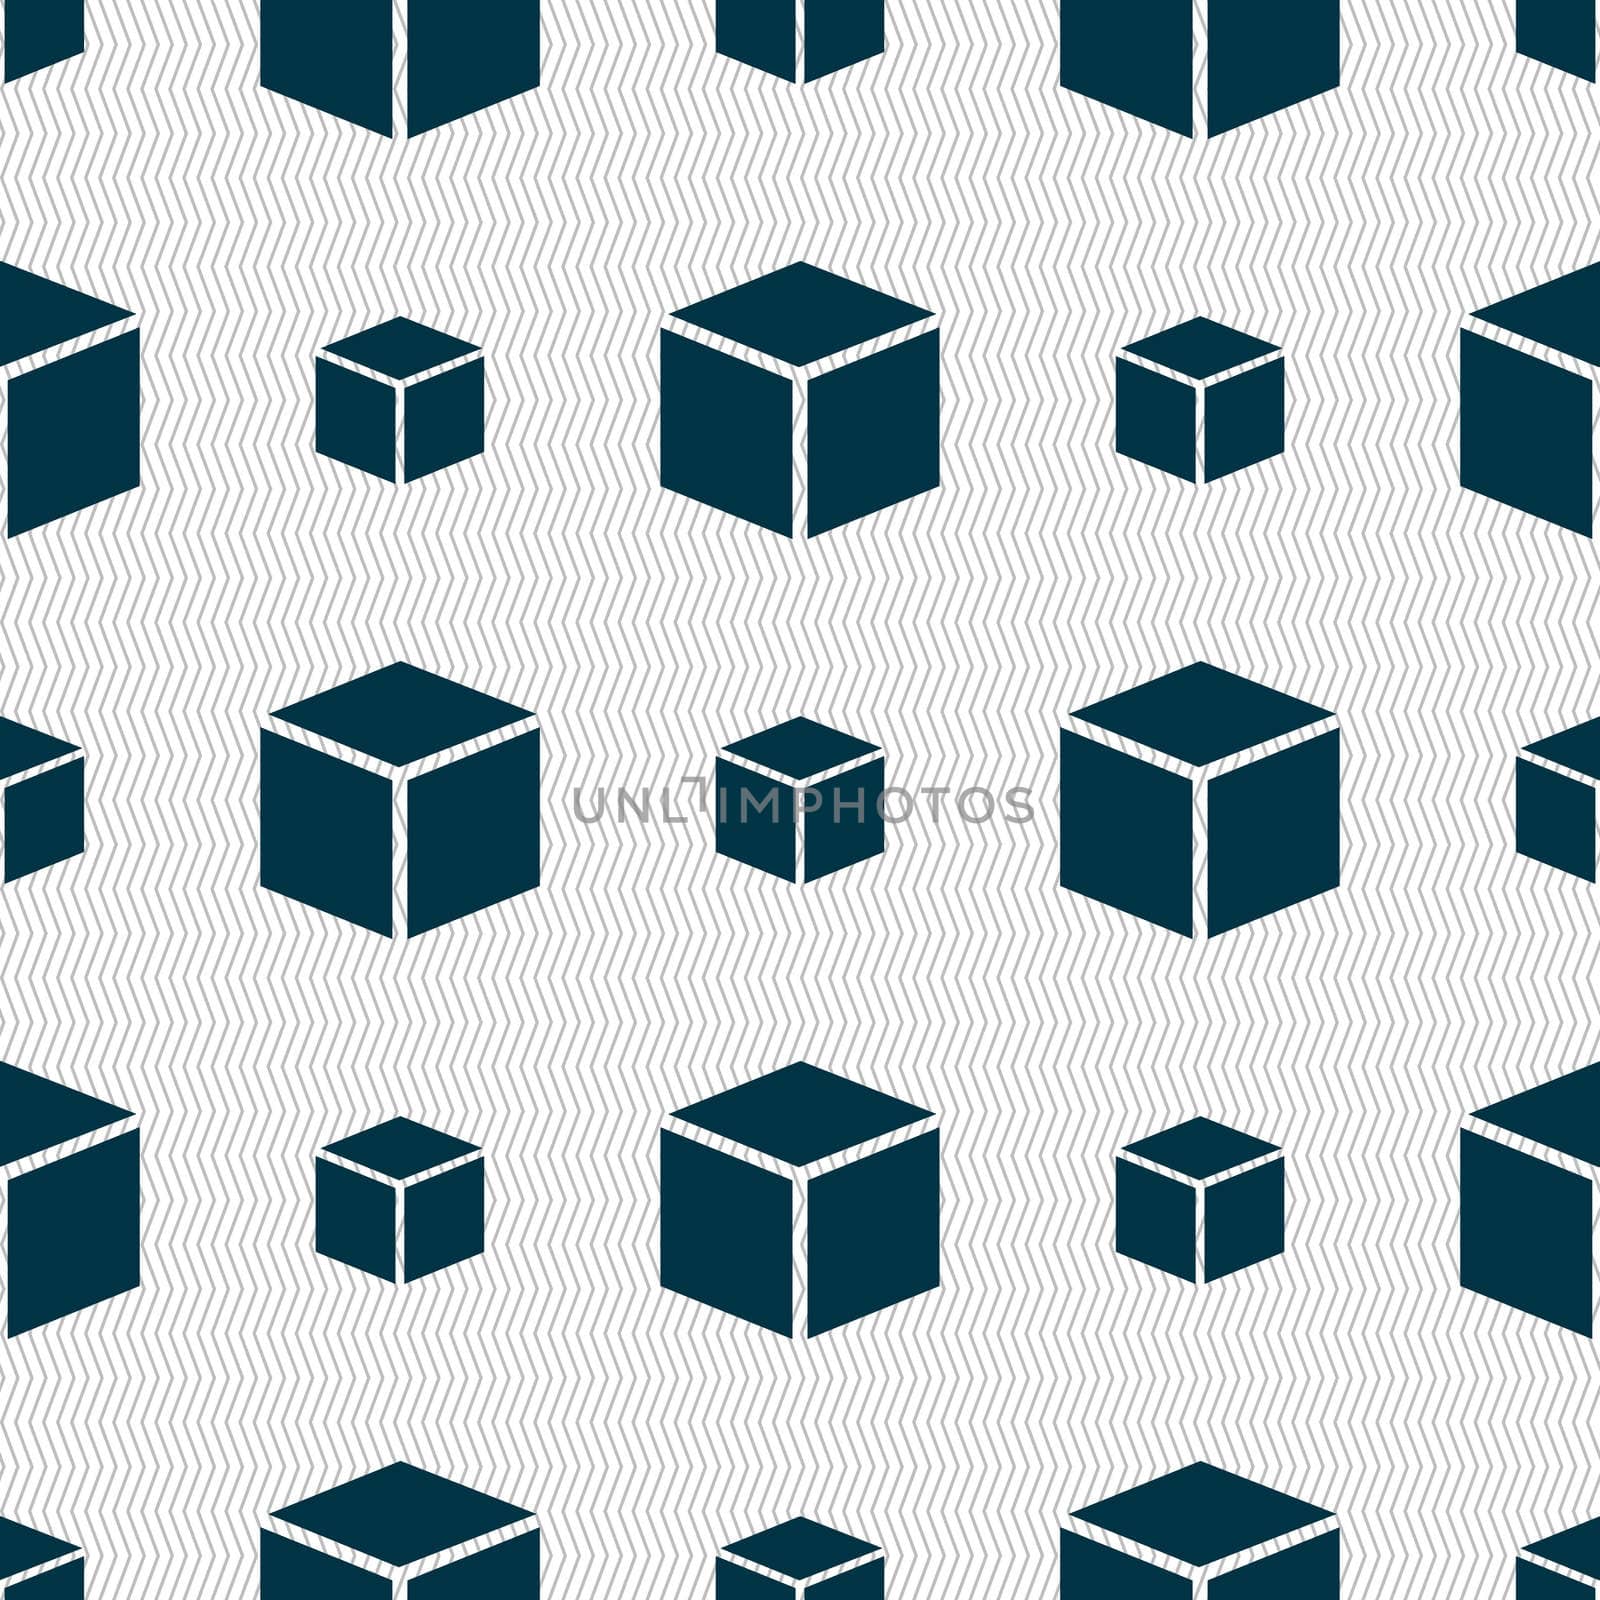 3d cube icon sign. Seamless abstract background with geometric shapes. illustration